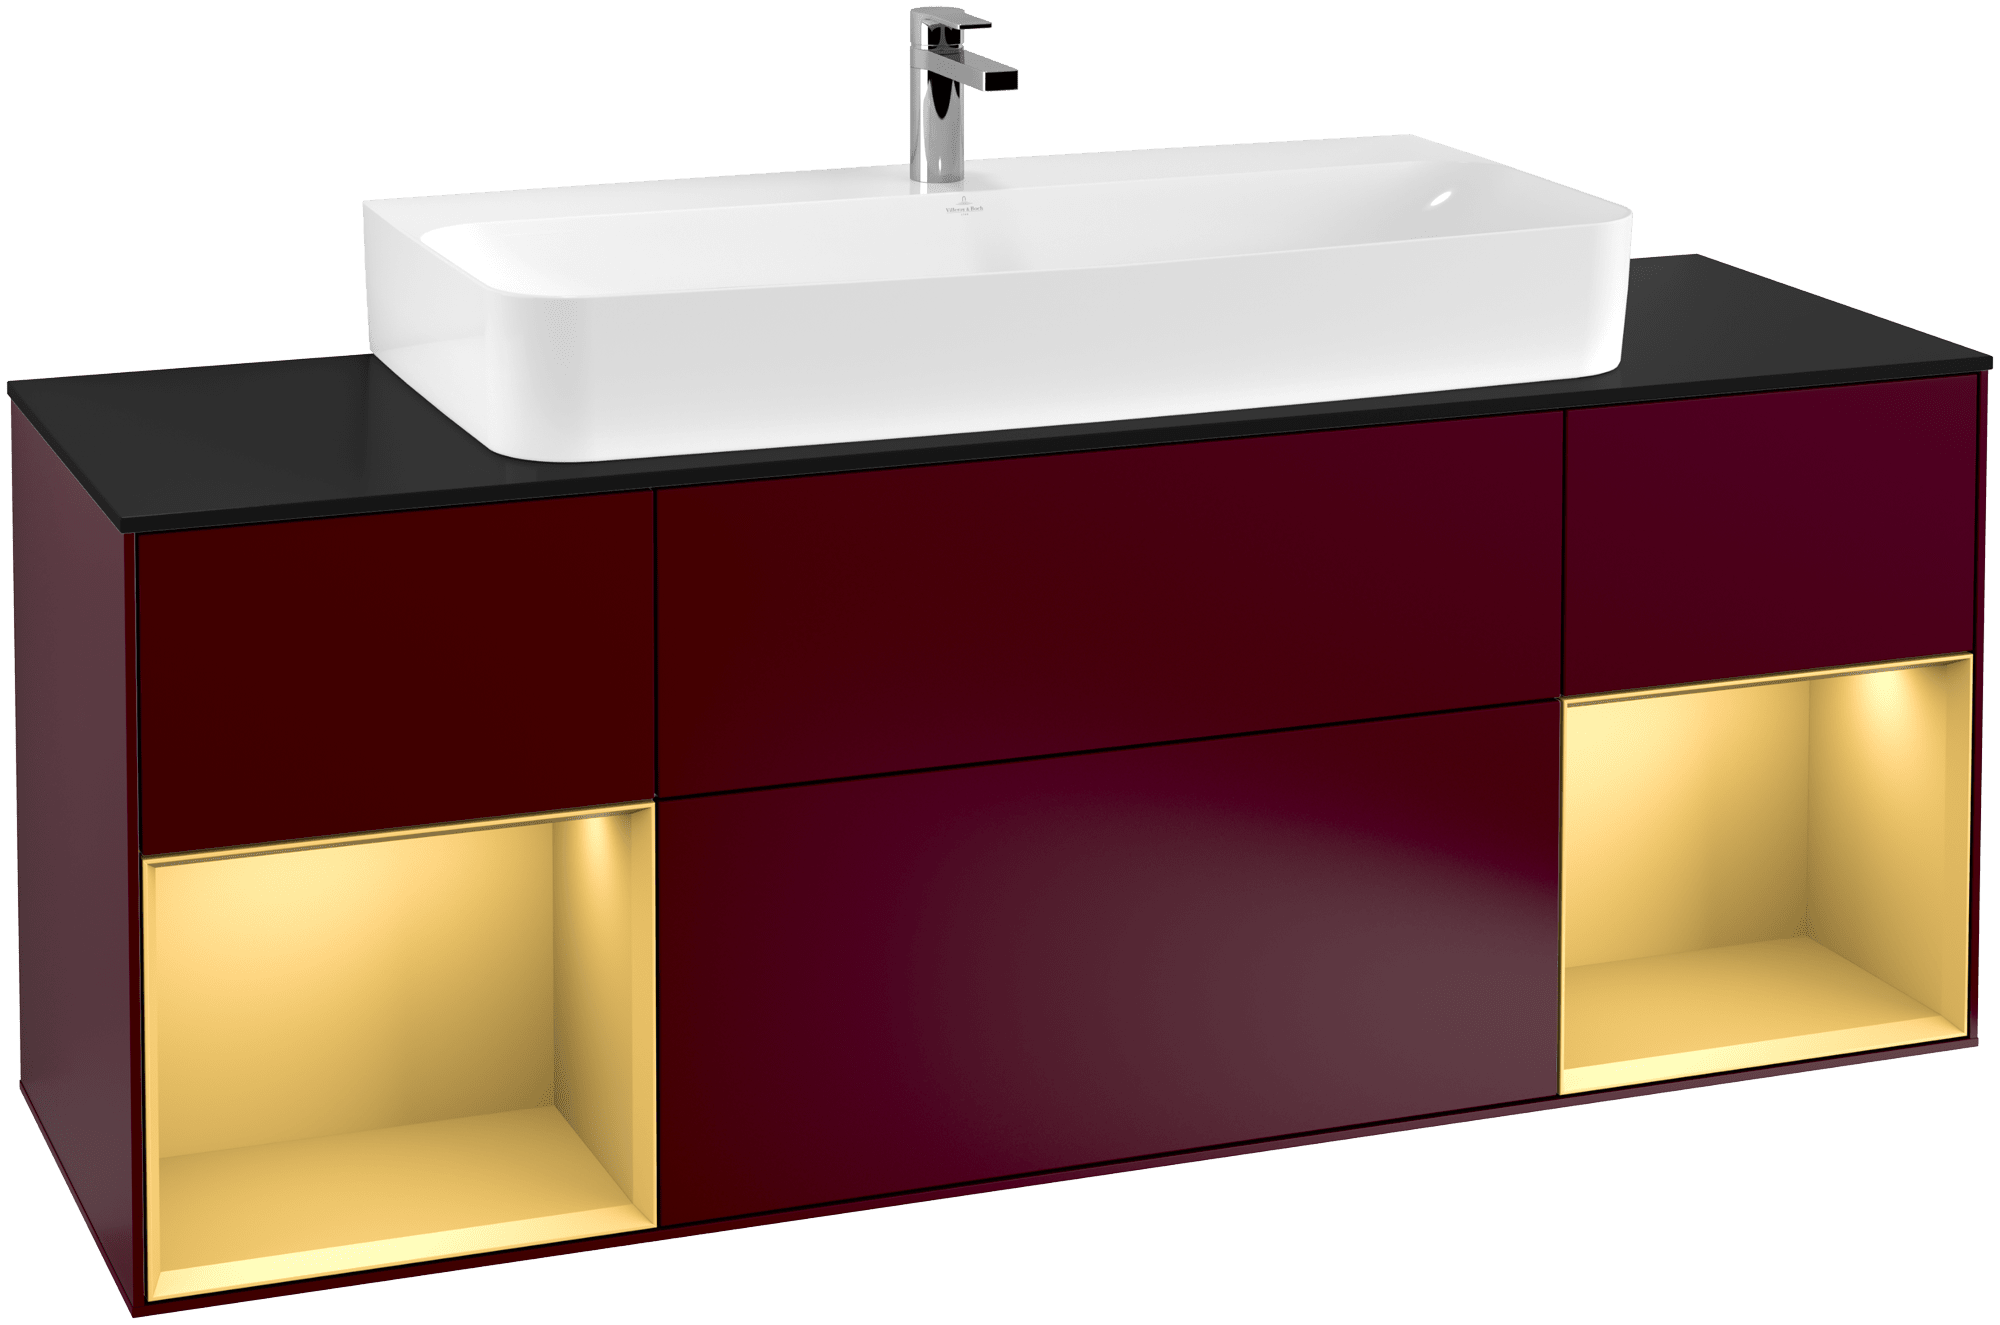 Picture of VILLEROY BOCH Finion Vanity unit, with lighting, 4 pull-out compartments, 1600 x 603 x 501 mm, Peony Matt Lacquer / Gold Matt Lacquer / Glass Black Matt #G212HFHB